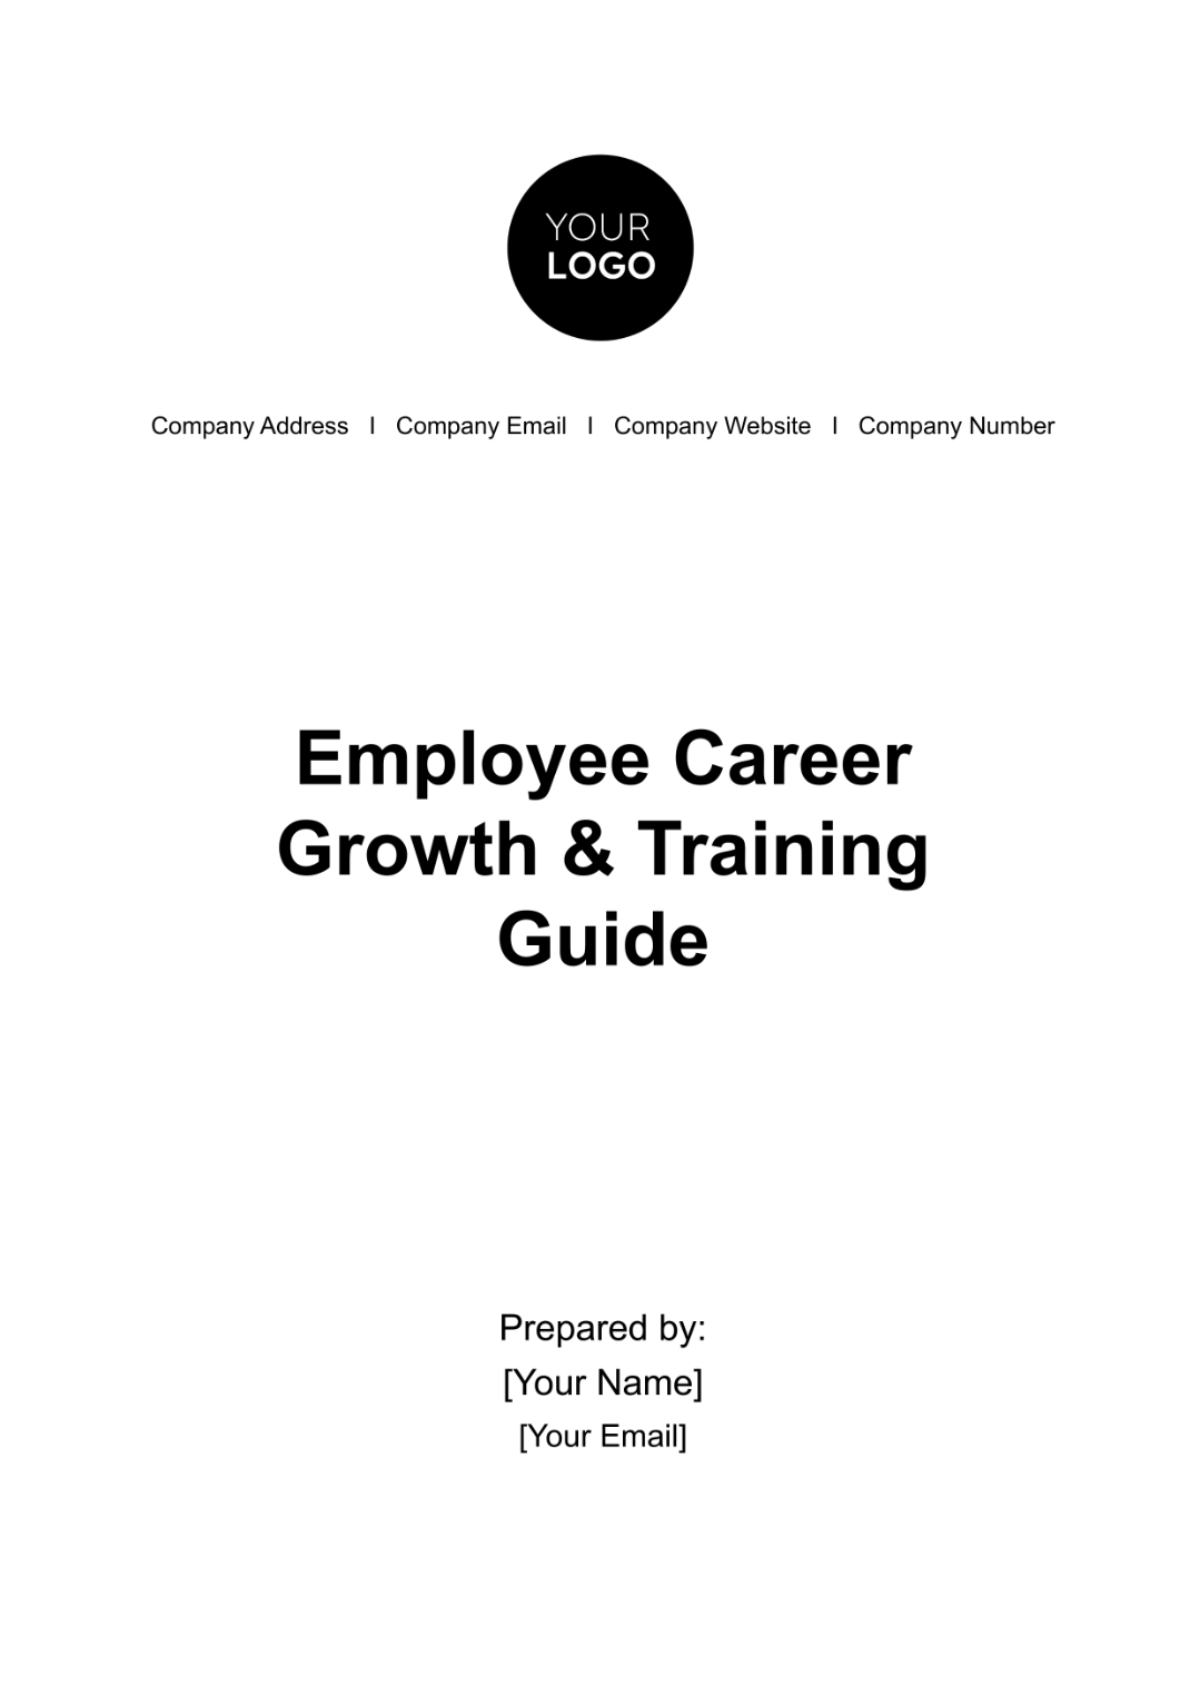 Free Employee Career Growth & Training Guide HR Template